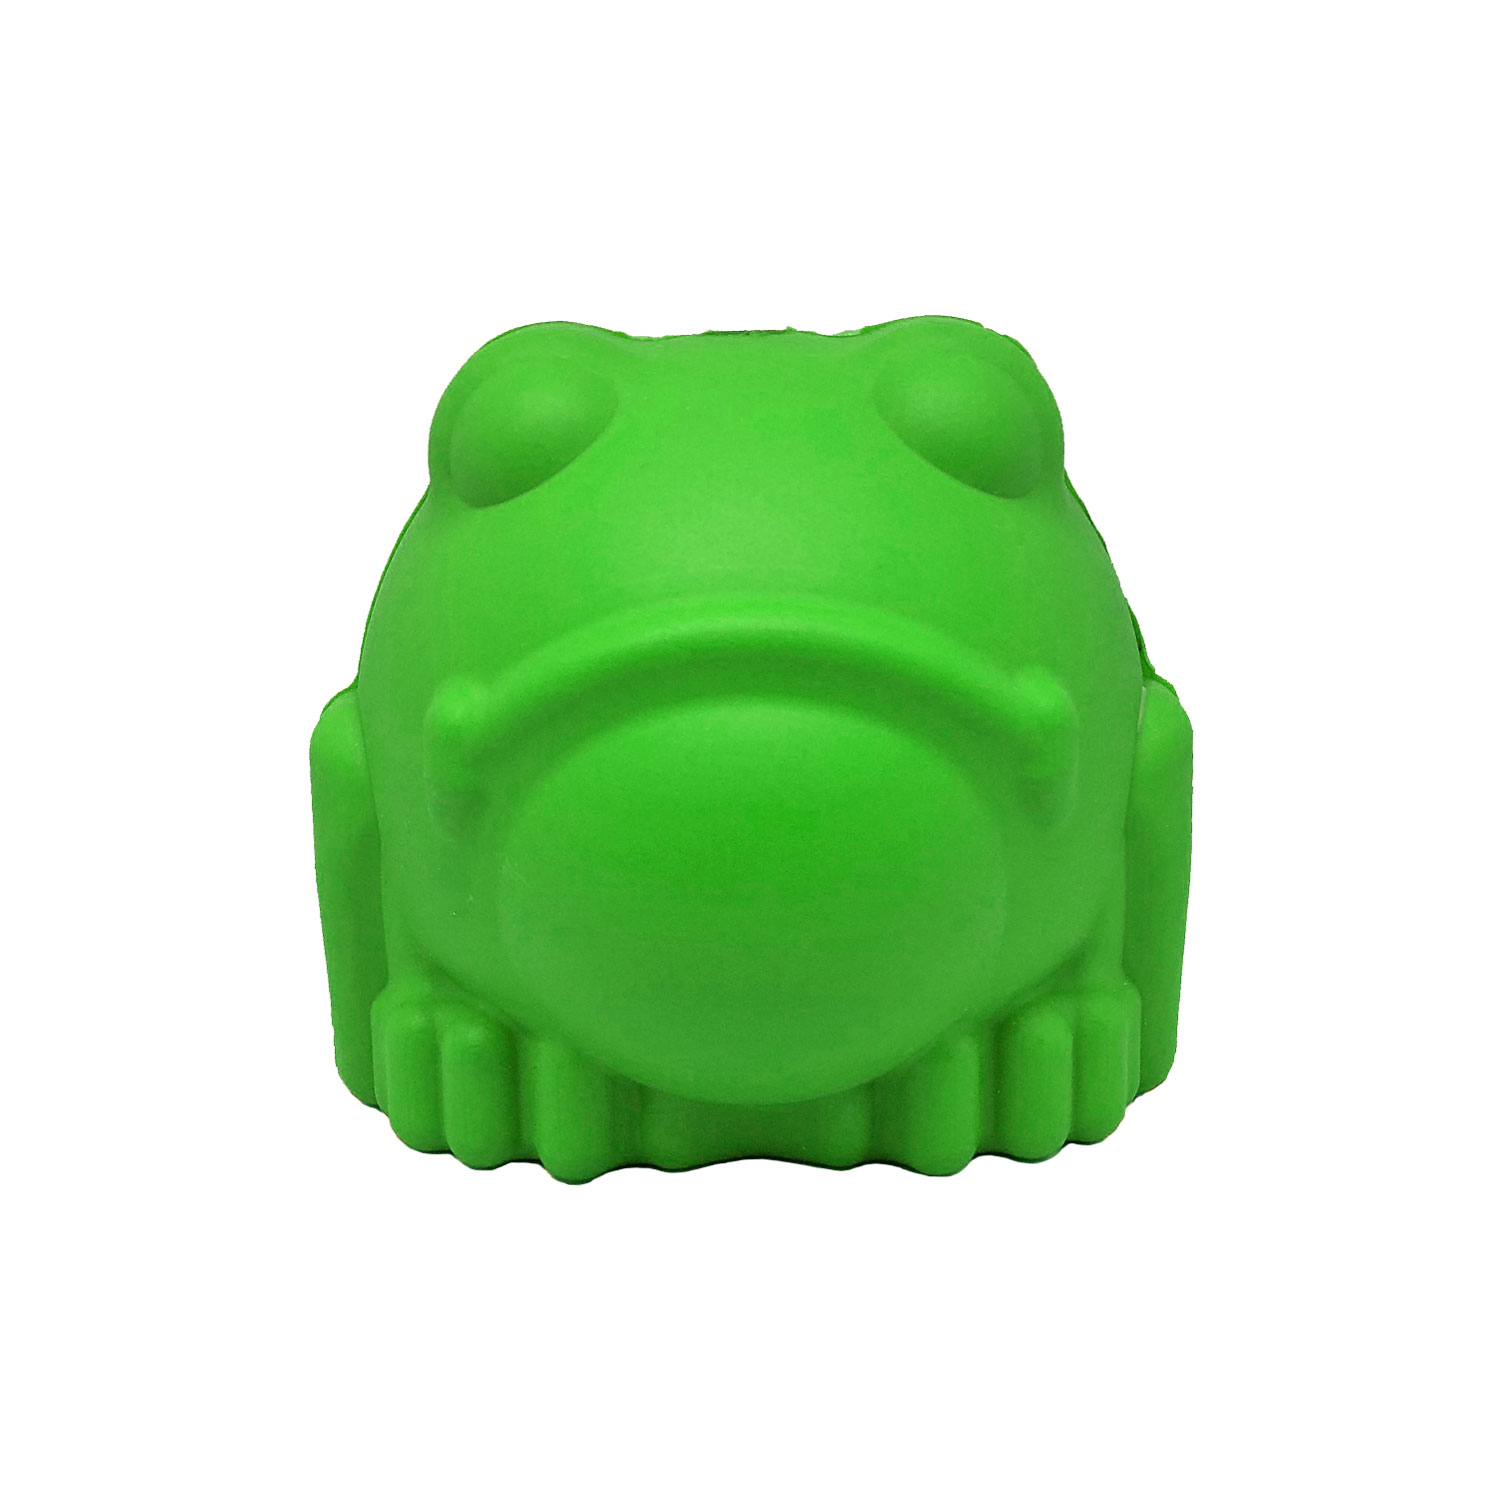 Gnome Durable PUP-X Rubber Chew Toy & Treat Dispenser